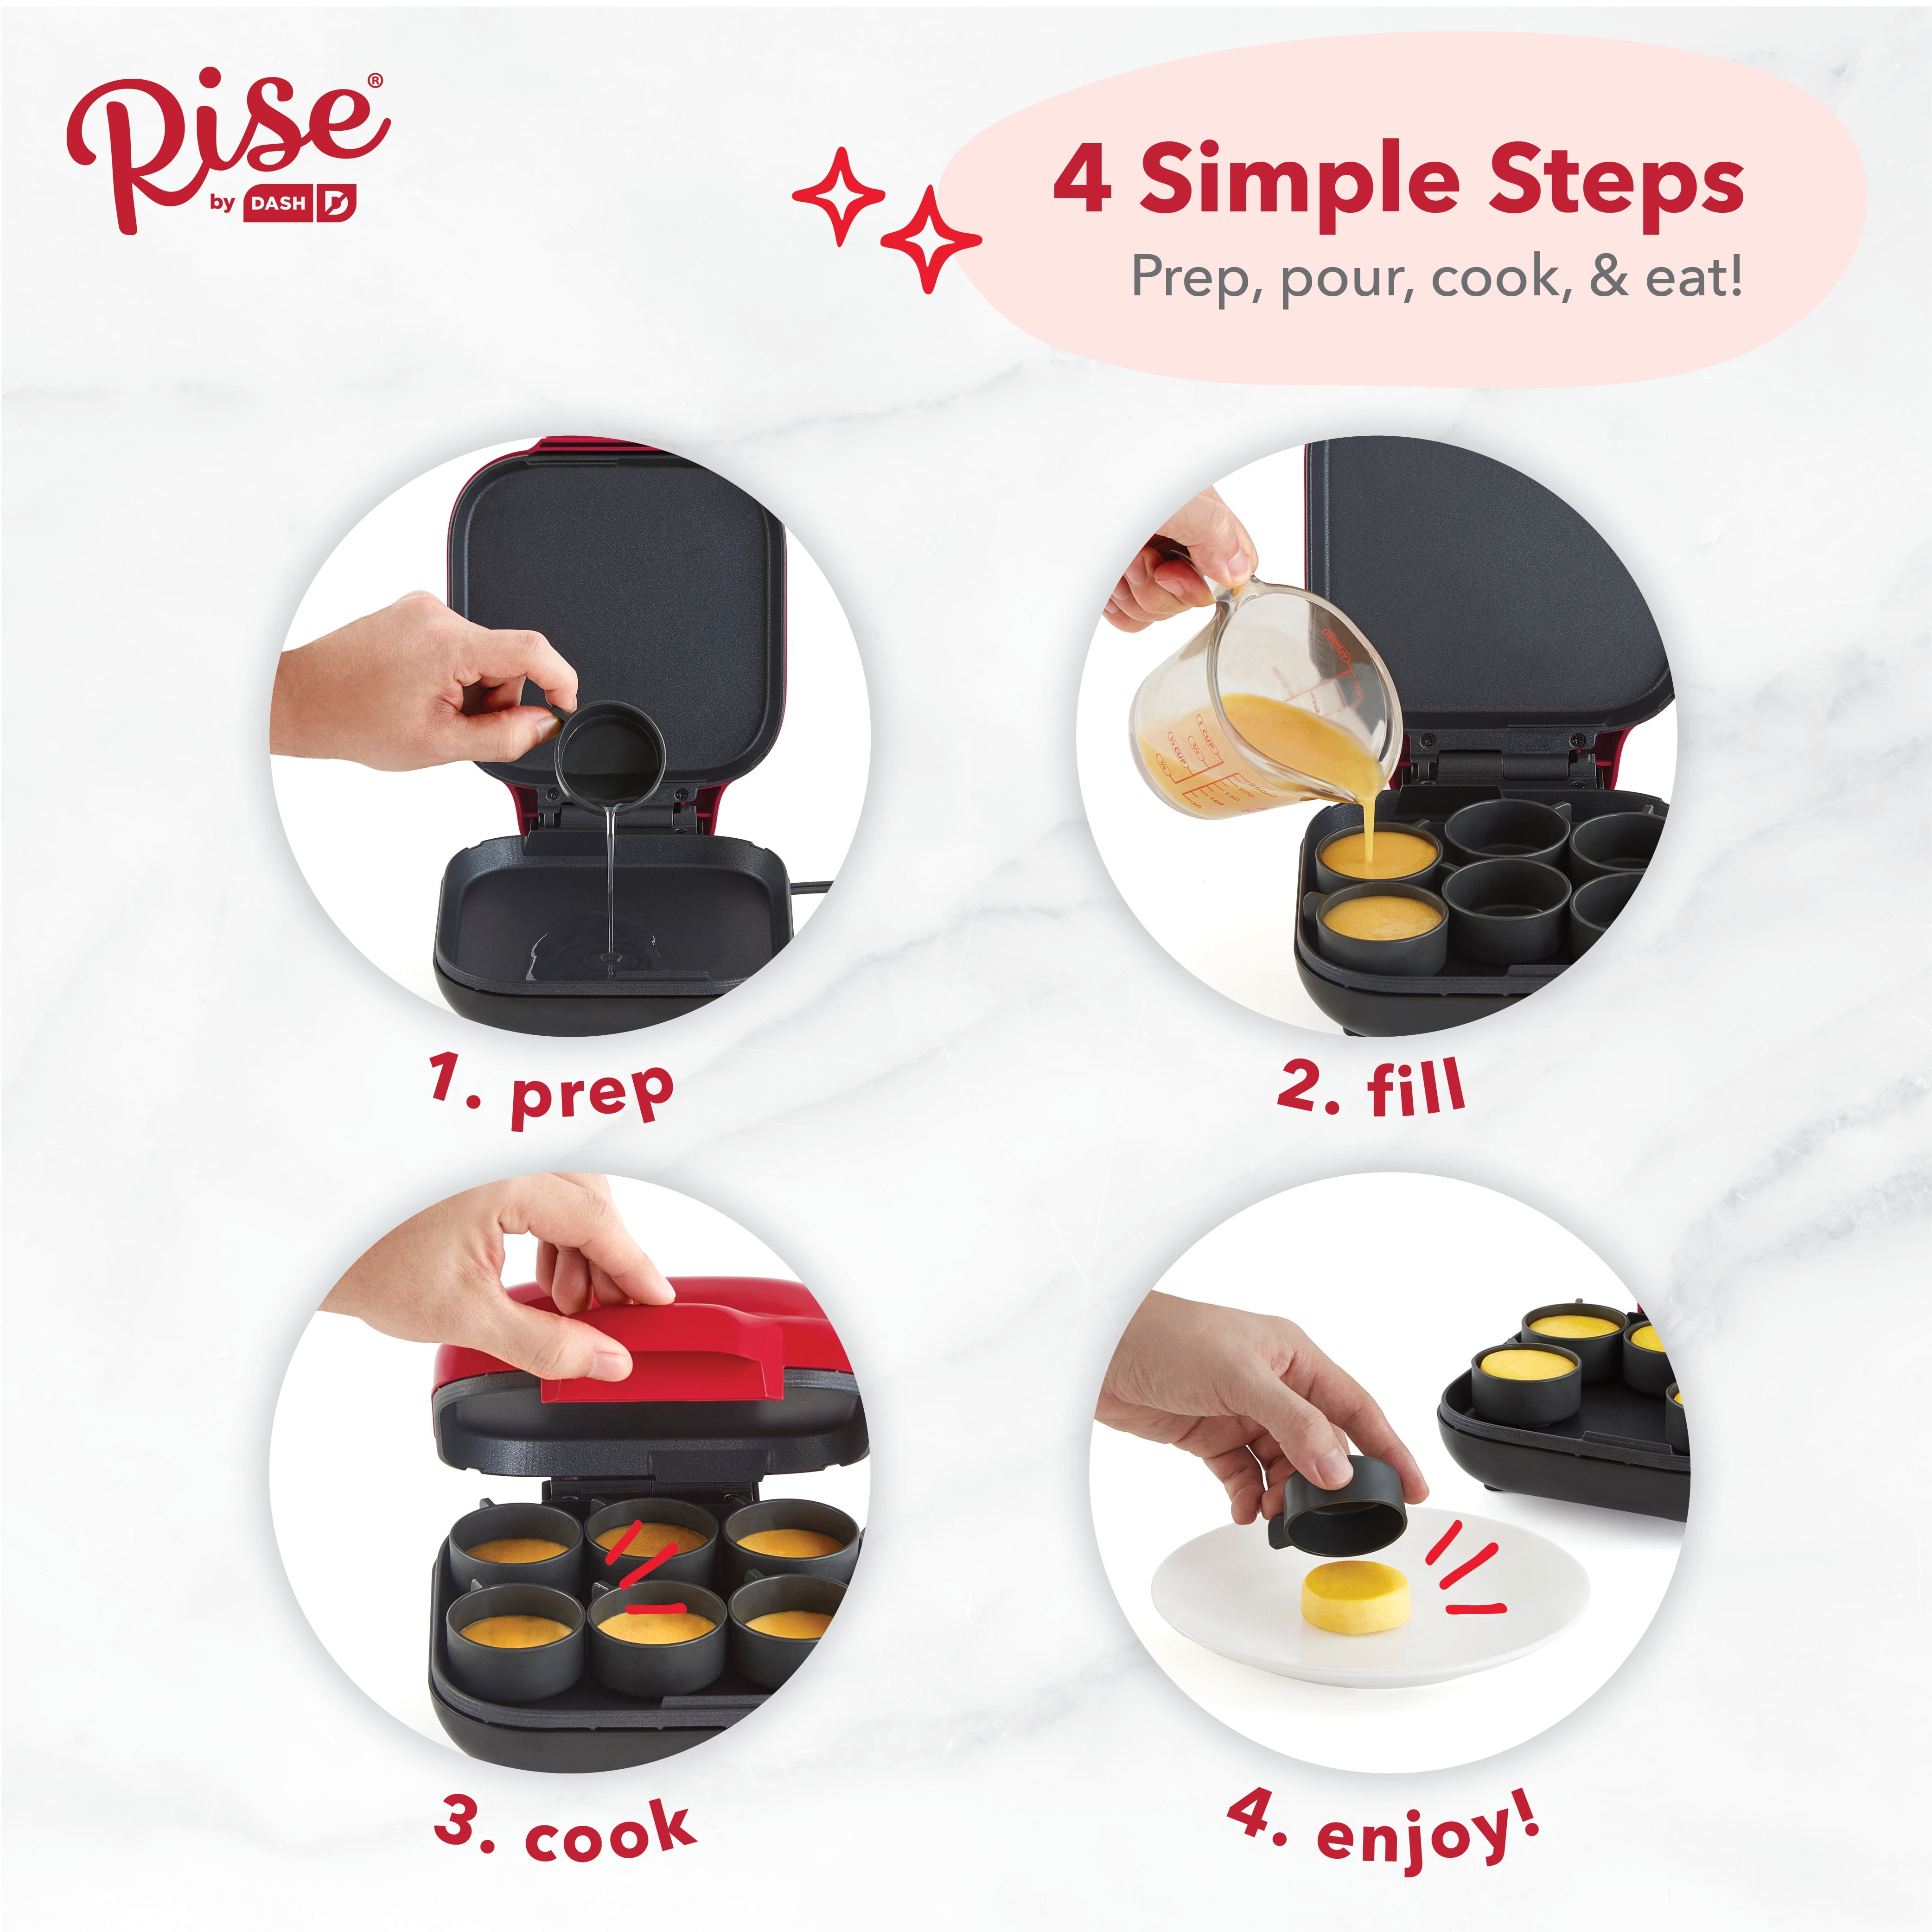 2Simpleagency  Quick & Easy Egg Bite Snack Maker ~ 2simpleagency